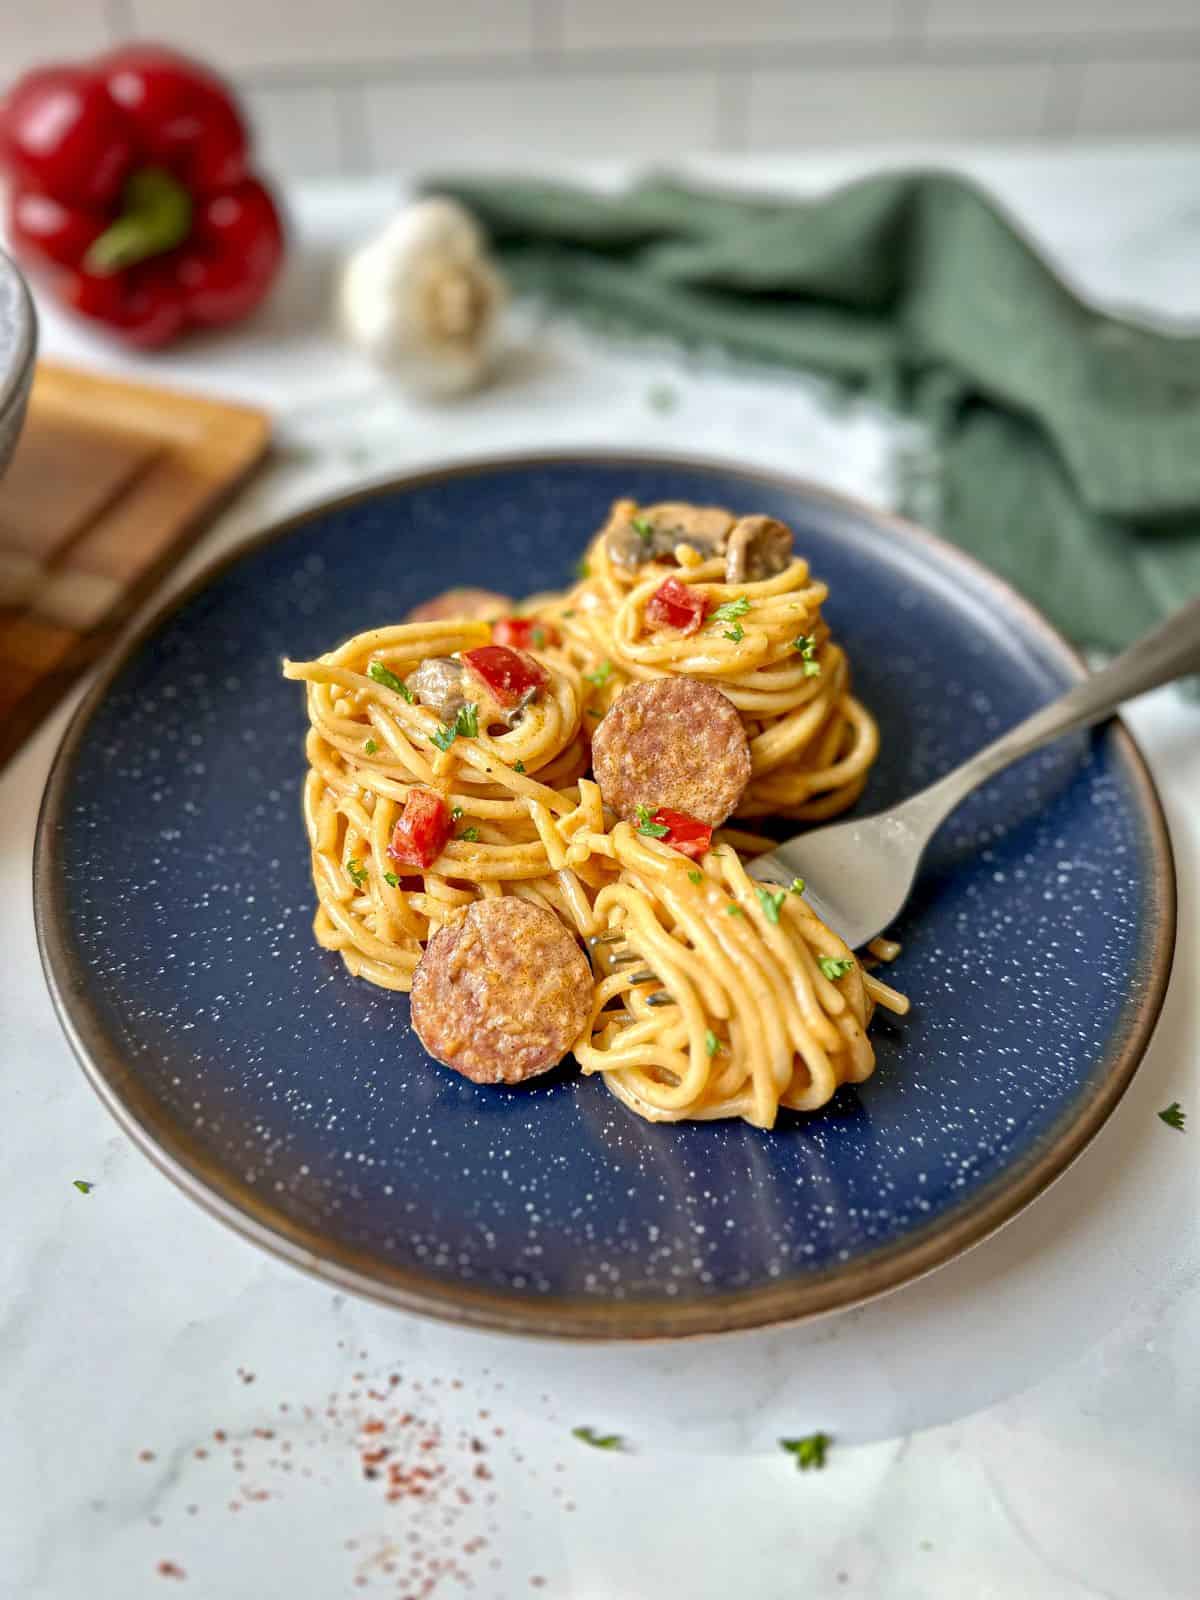 A plate and fork with spaghetti, sausage, and peppers.